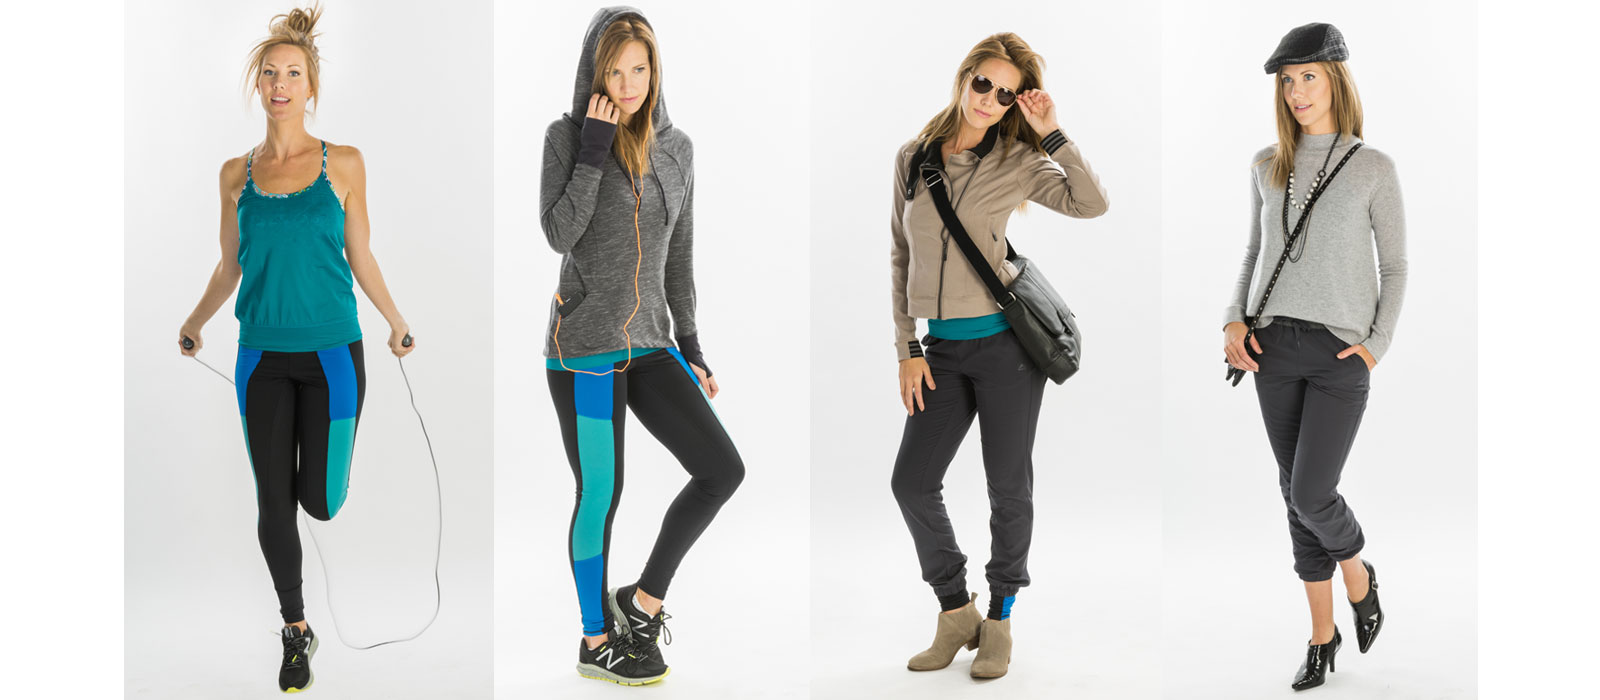 Women's Athleisure, Seeing Thngs, Clothing